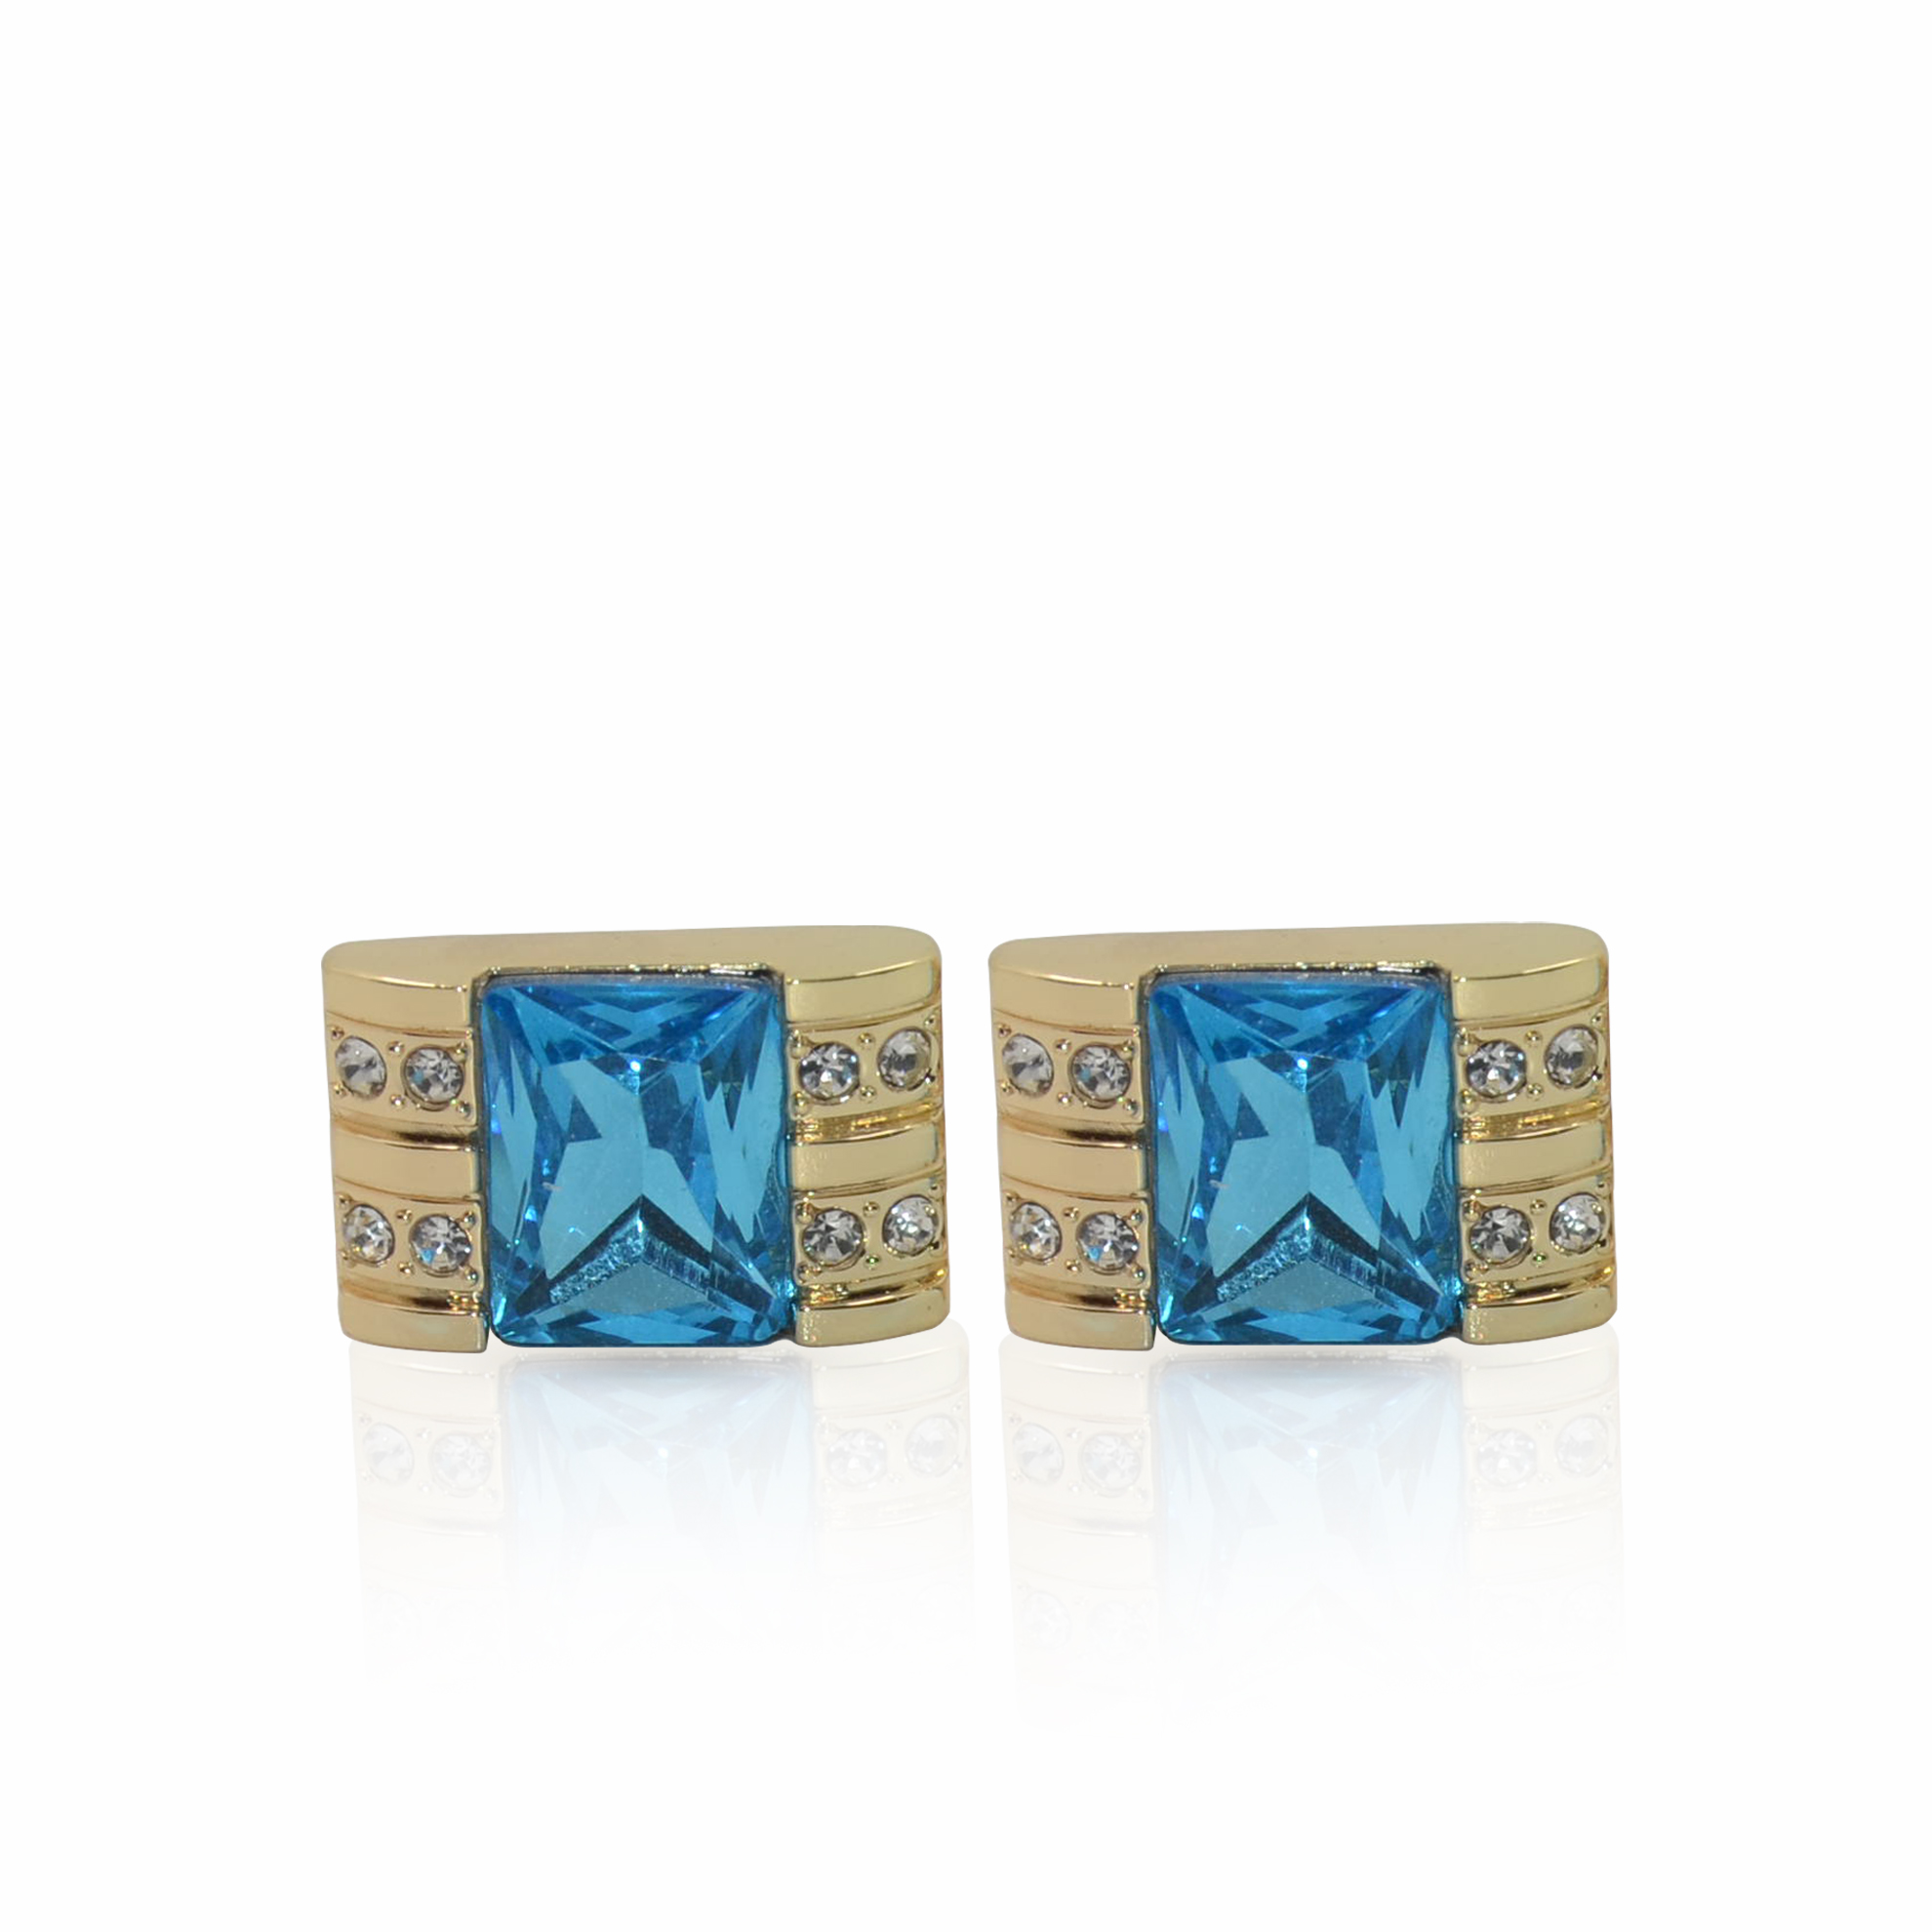 Cufflers Novelty Gold Square Cufflinks CU-2033 with Free Gift Box